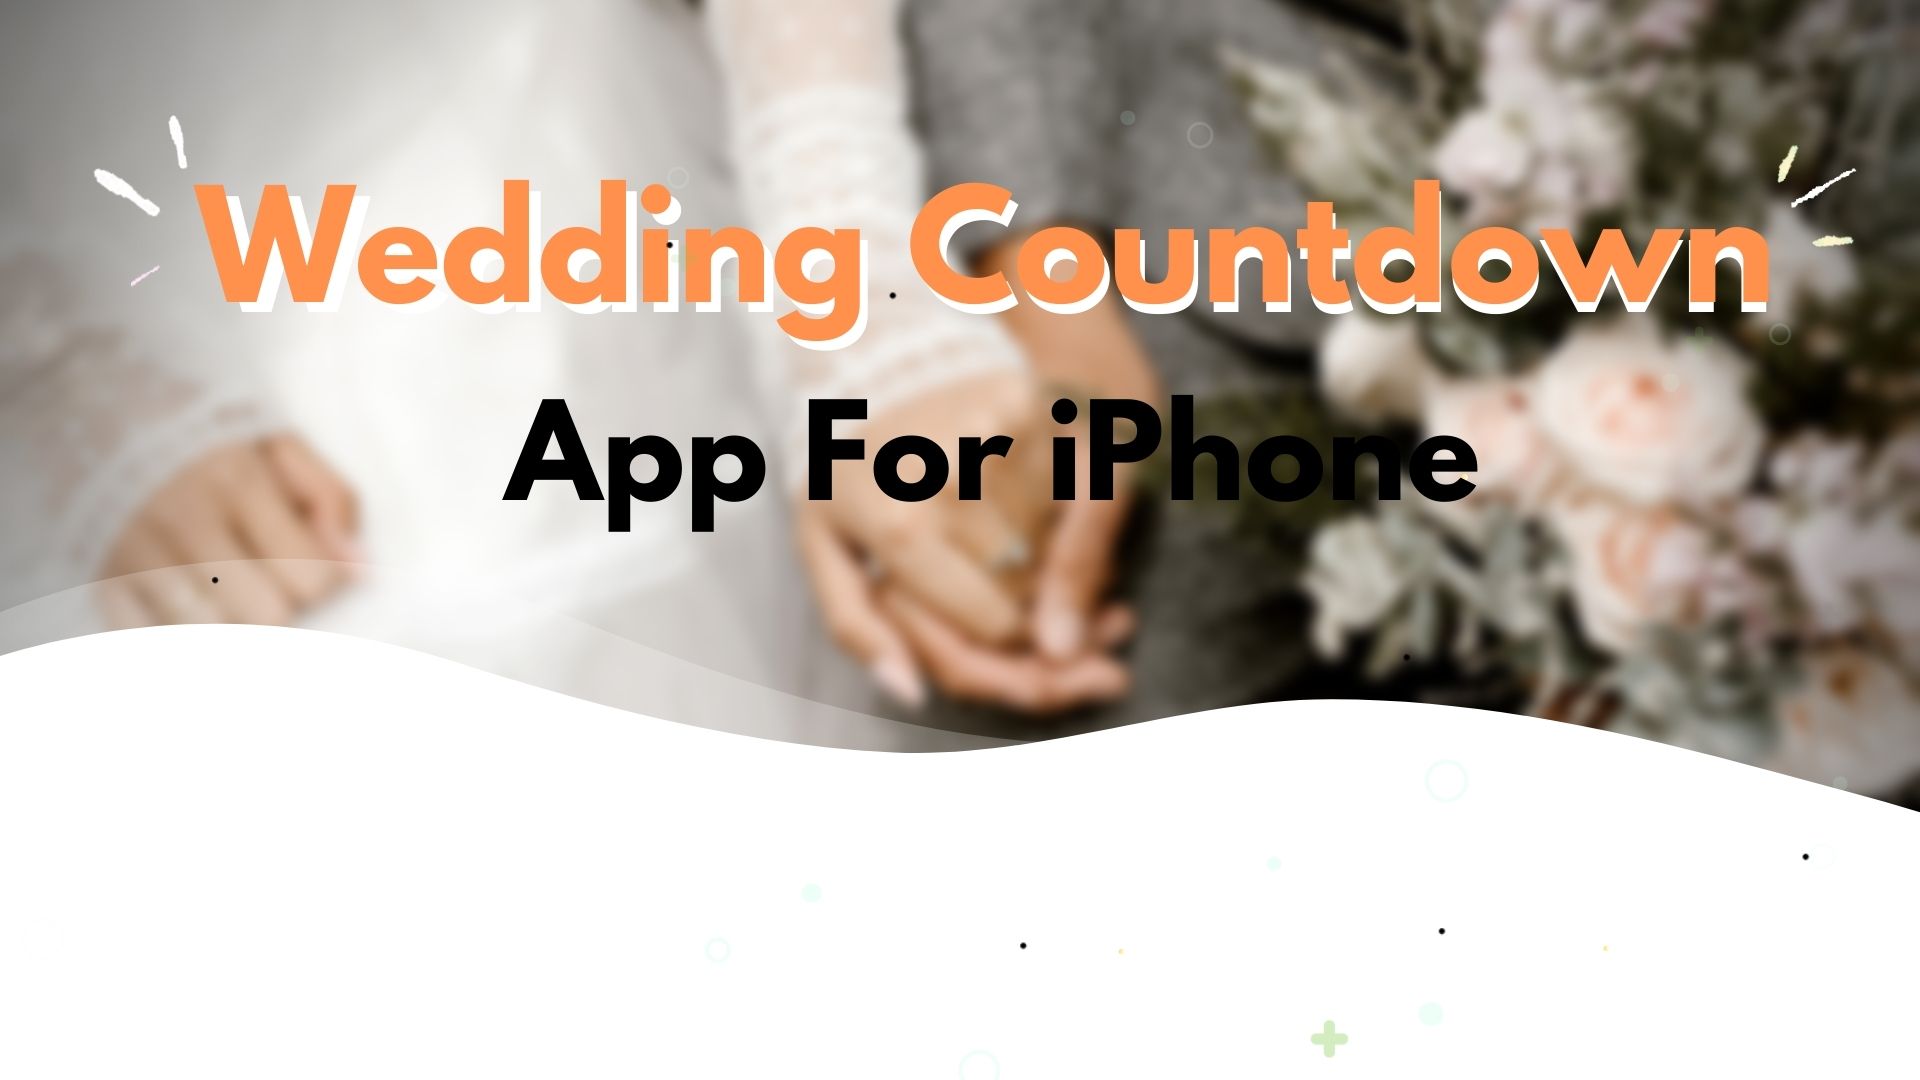 Wedding Countdown App For iPhone